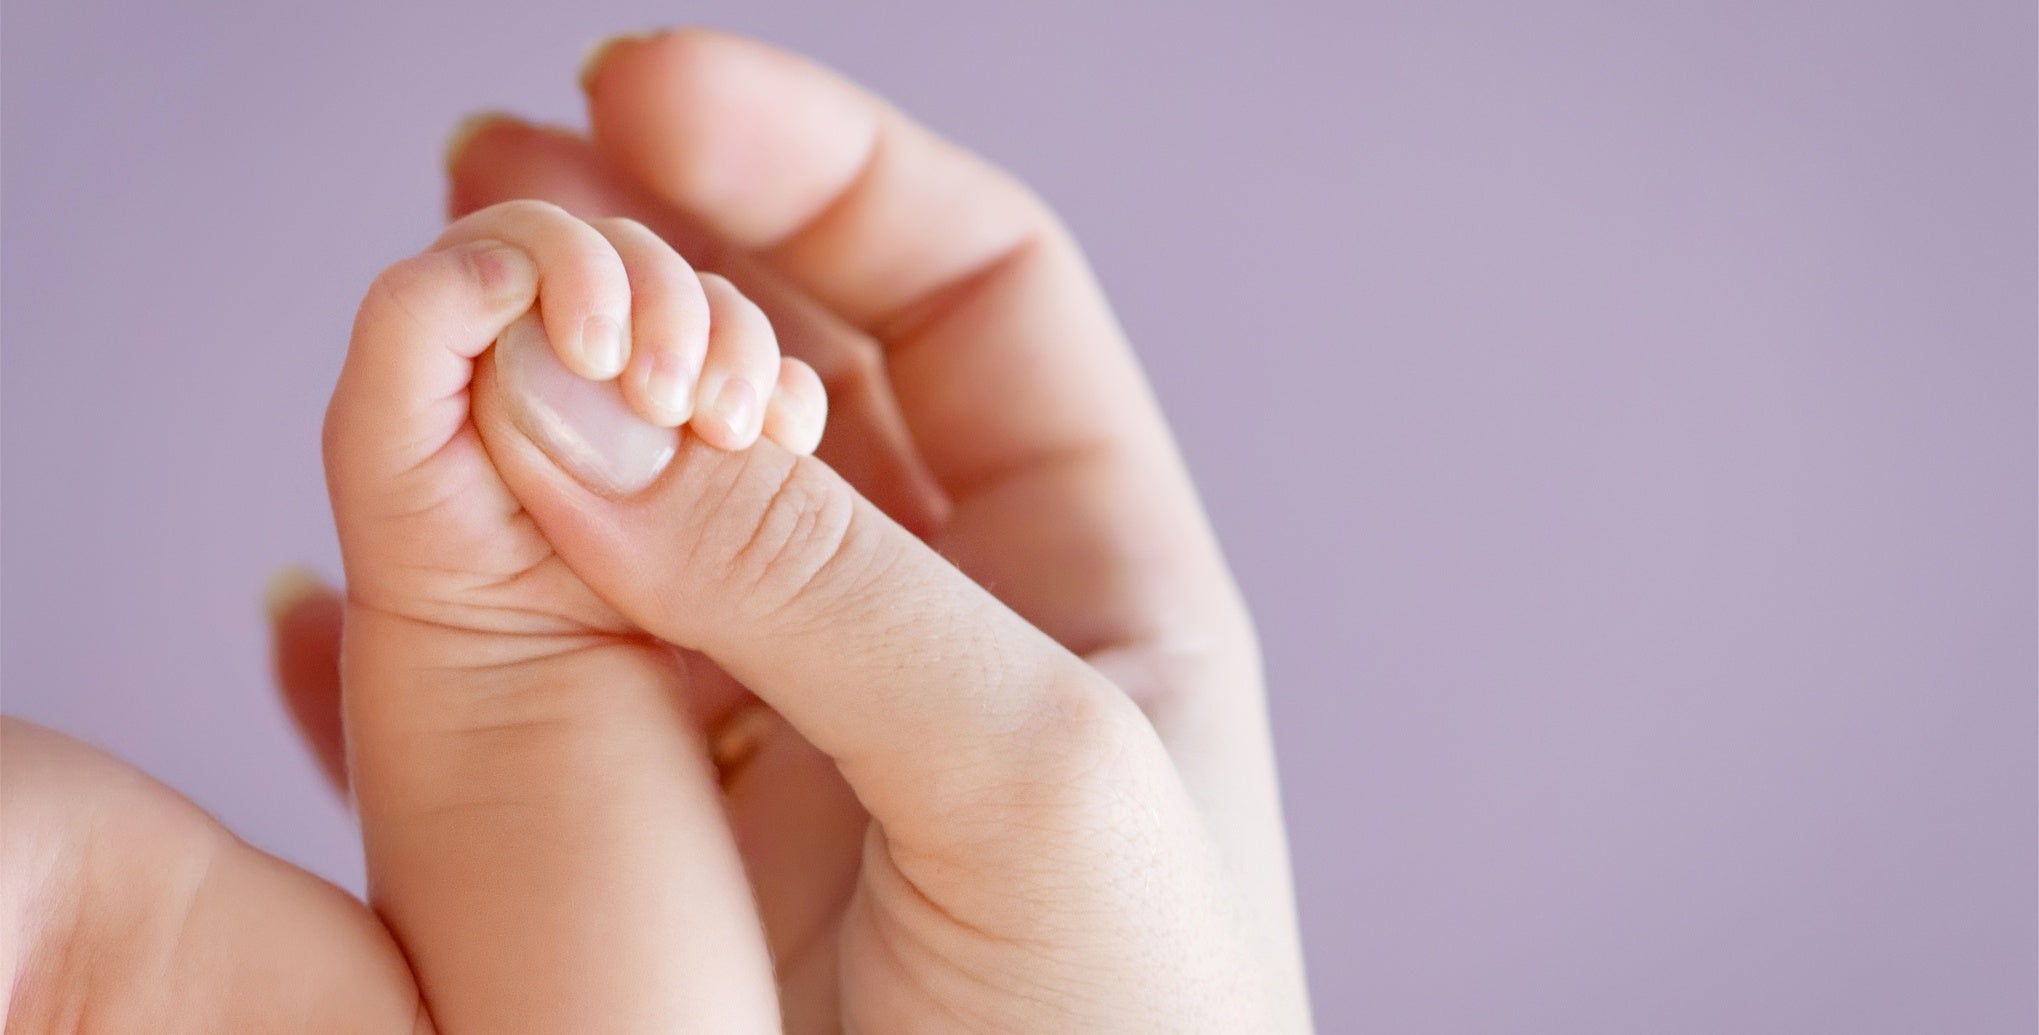 A woman's hand holding a baby's foot.